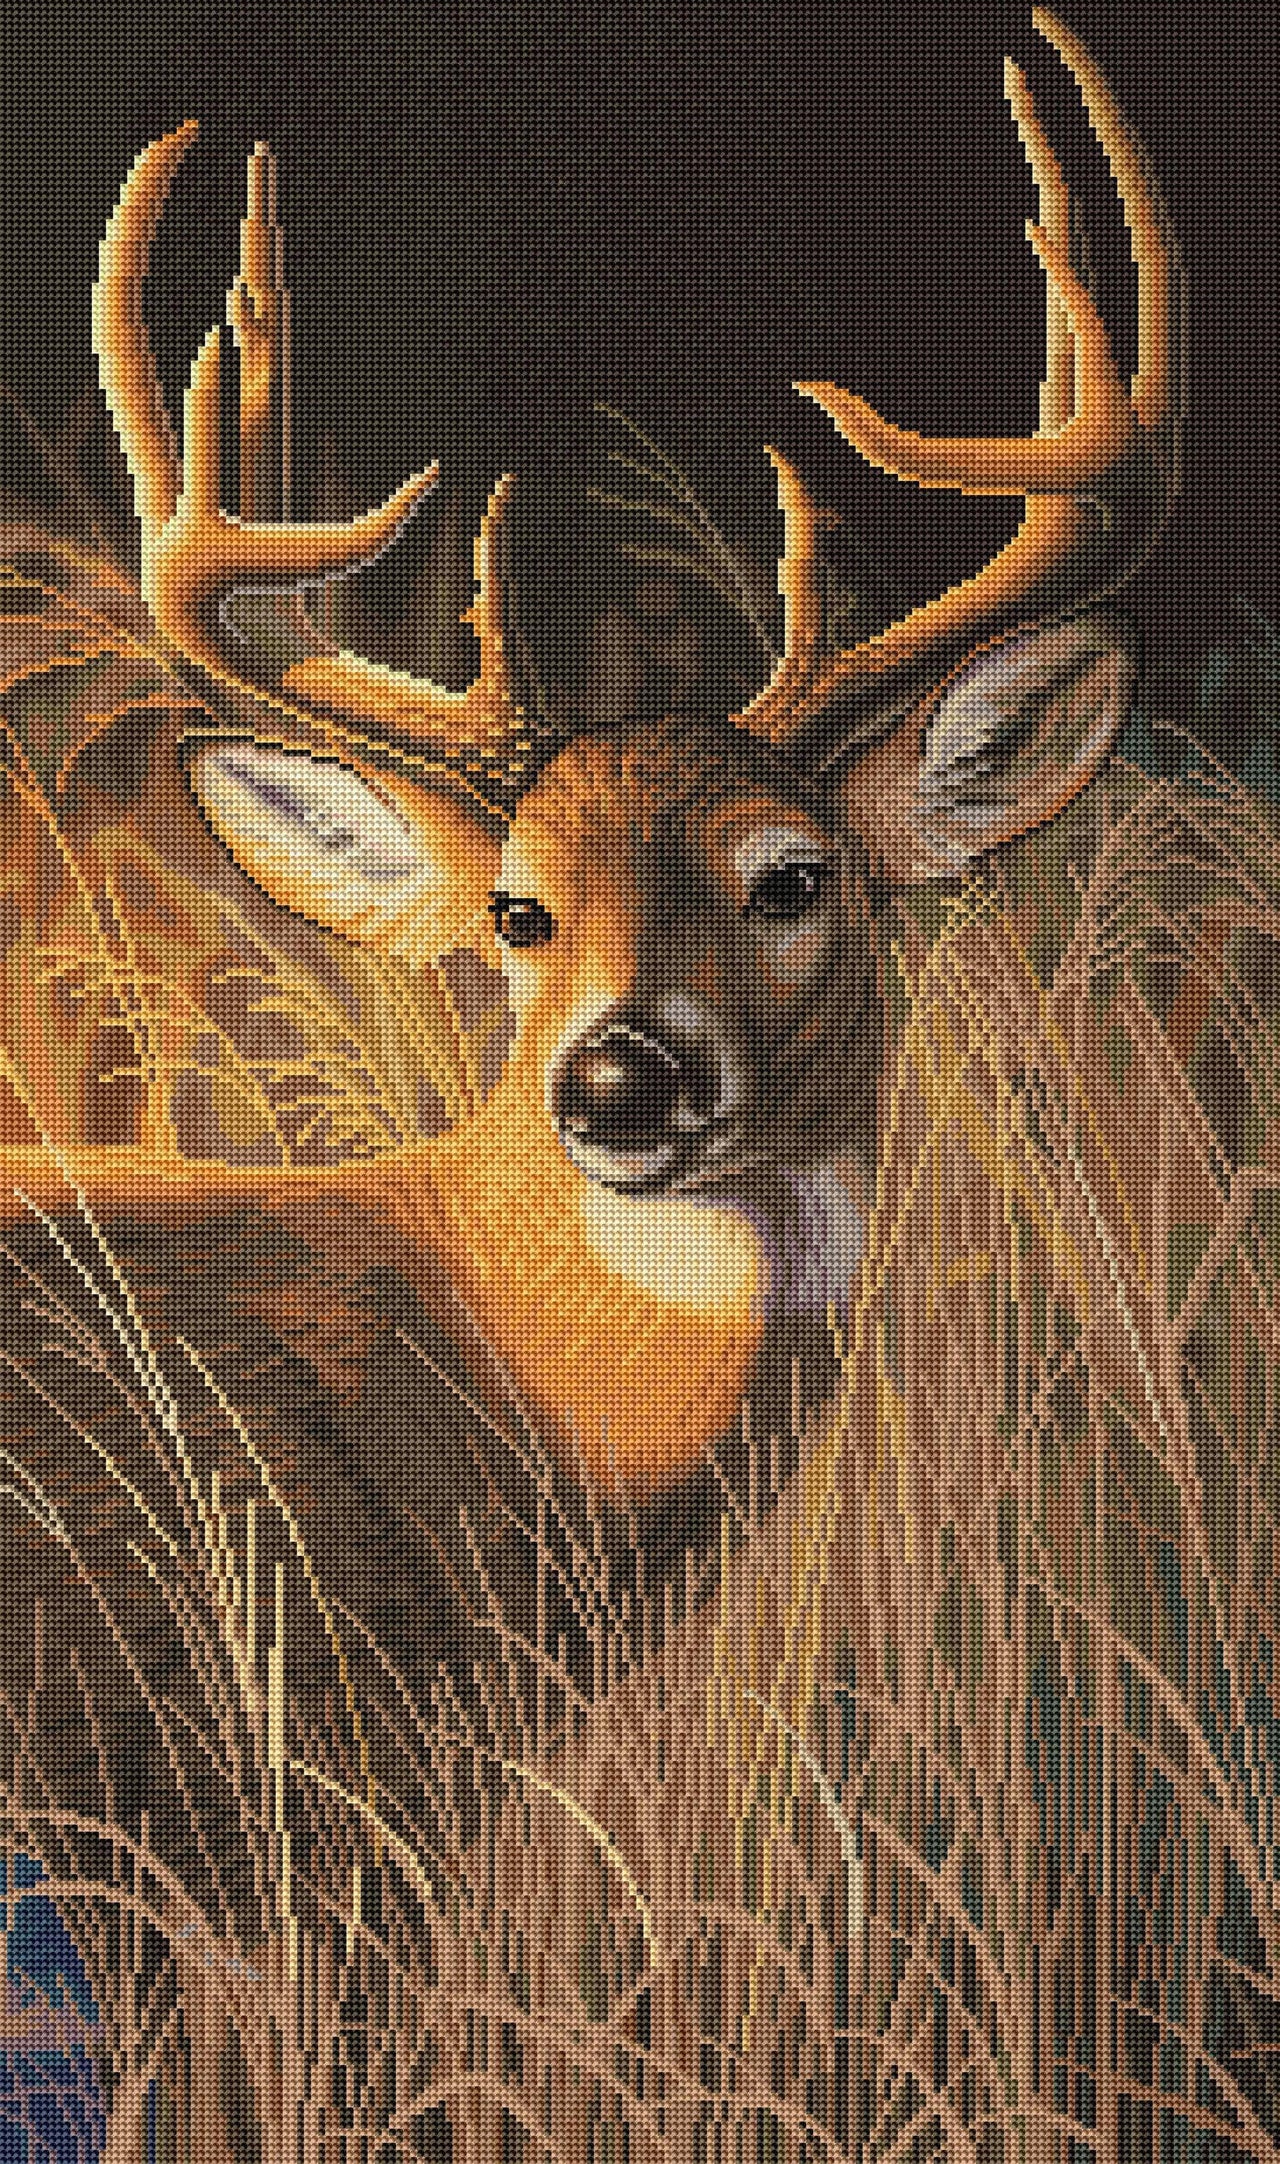 Diamond Painting Oak Island Whitetail 20" x 34" (51cm x 86cm) / Round With 30 Colors Including 3 ABs / 55,386